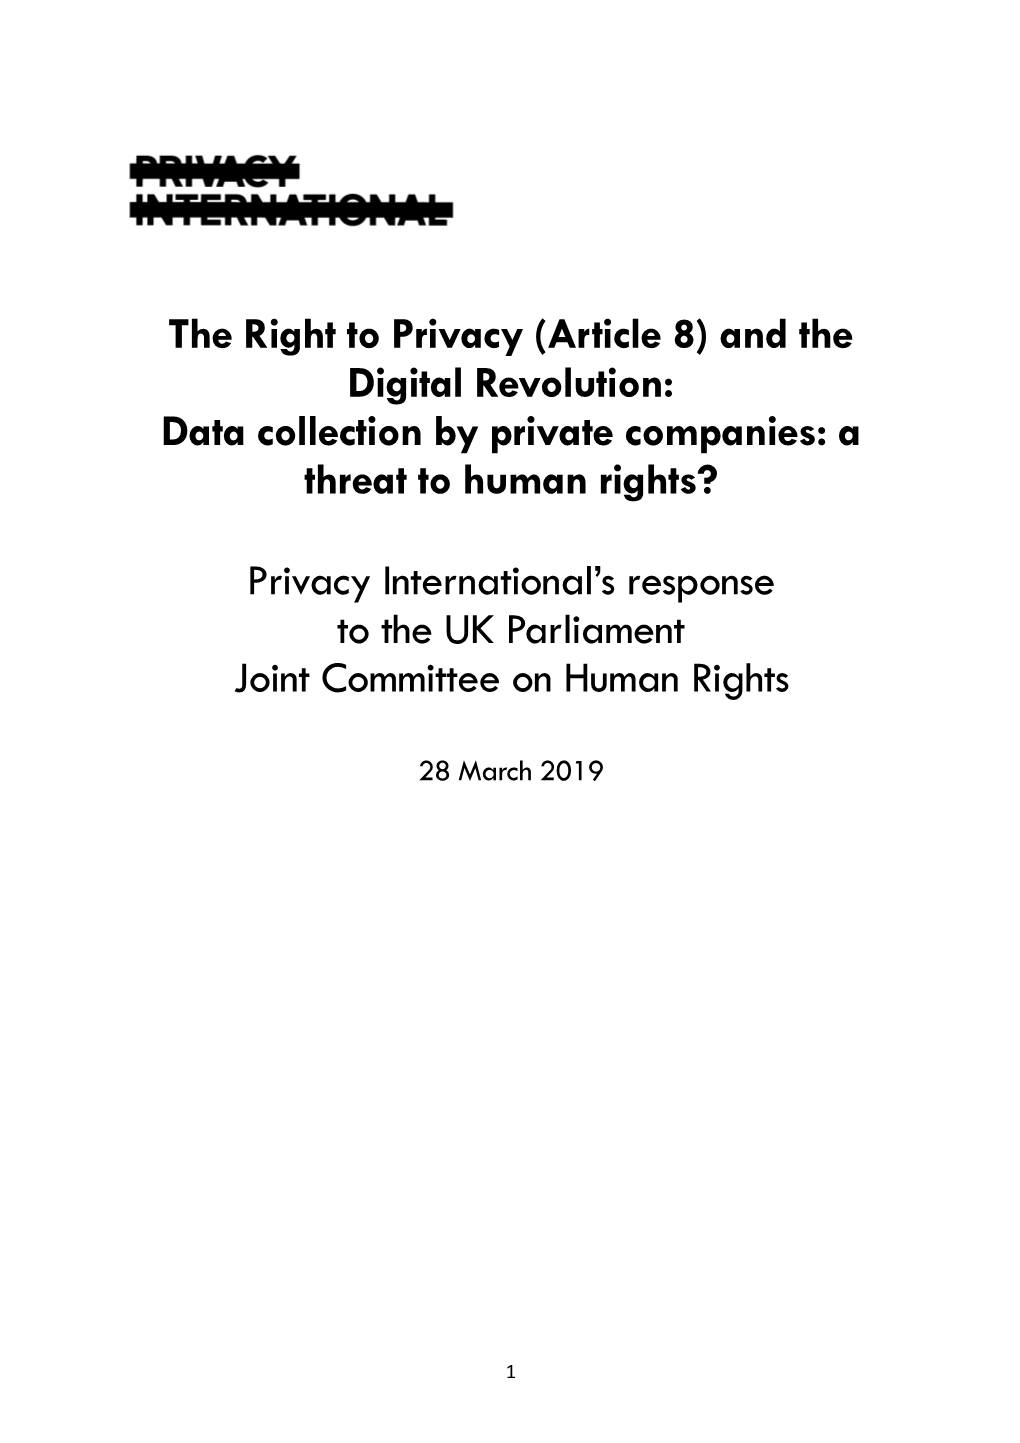 The Right to Privacy (Article 8) and the Digital Revolution: Data Collection by Private Companies: a Threat to Human Rights?